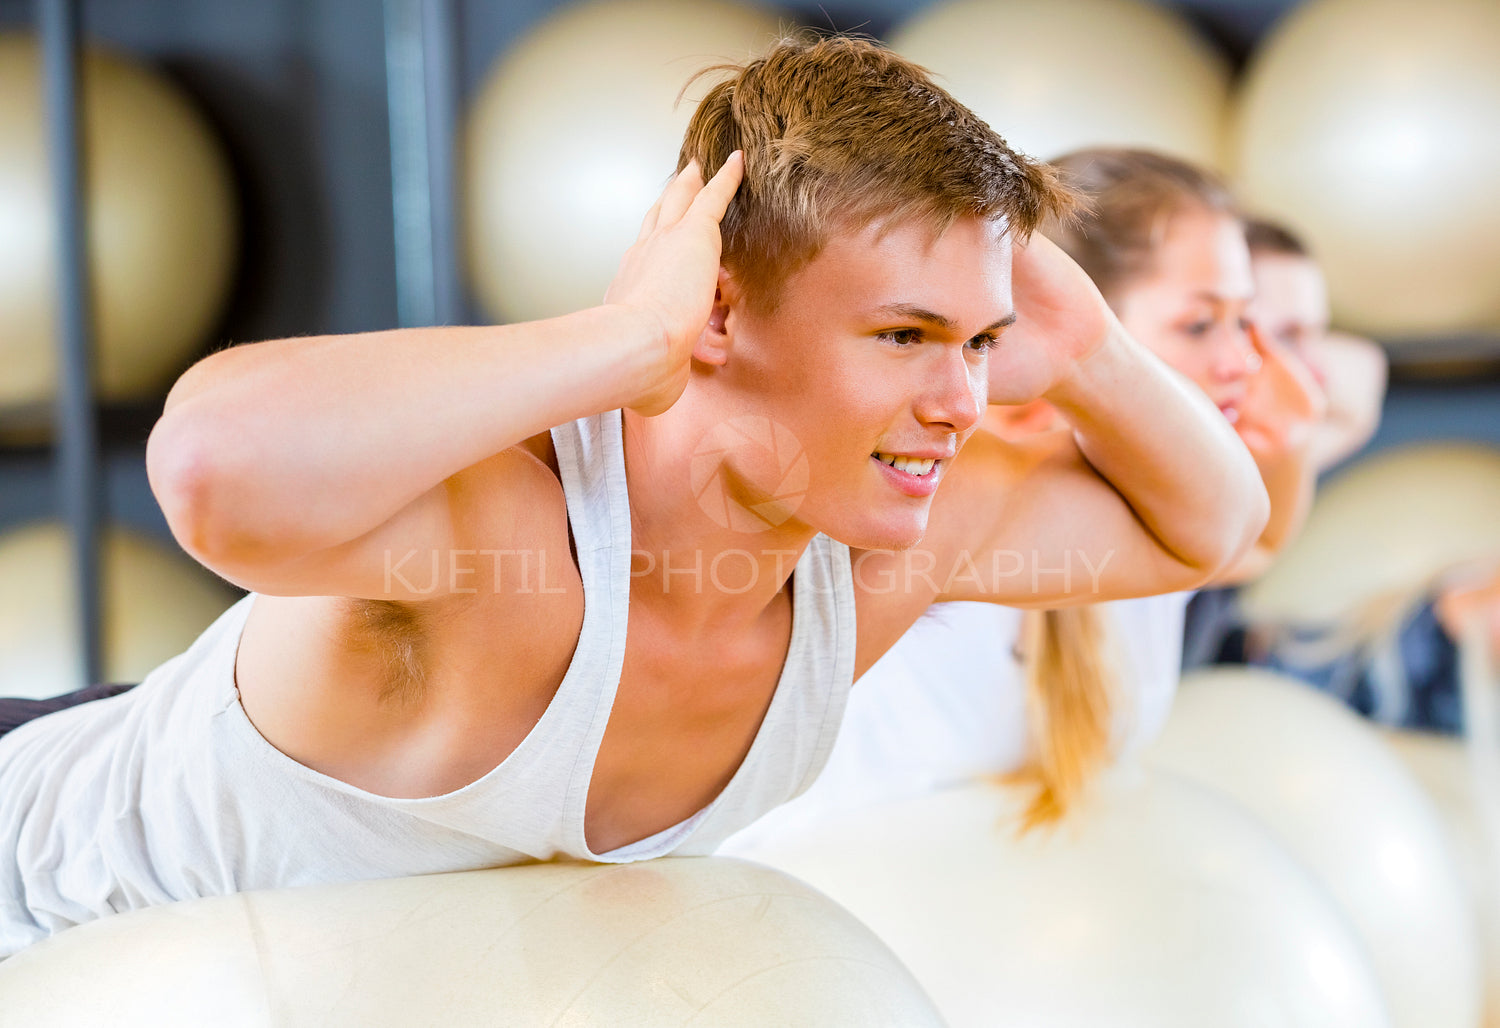 Man Performing Back Extension Exercise With Friends